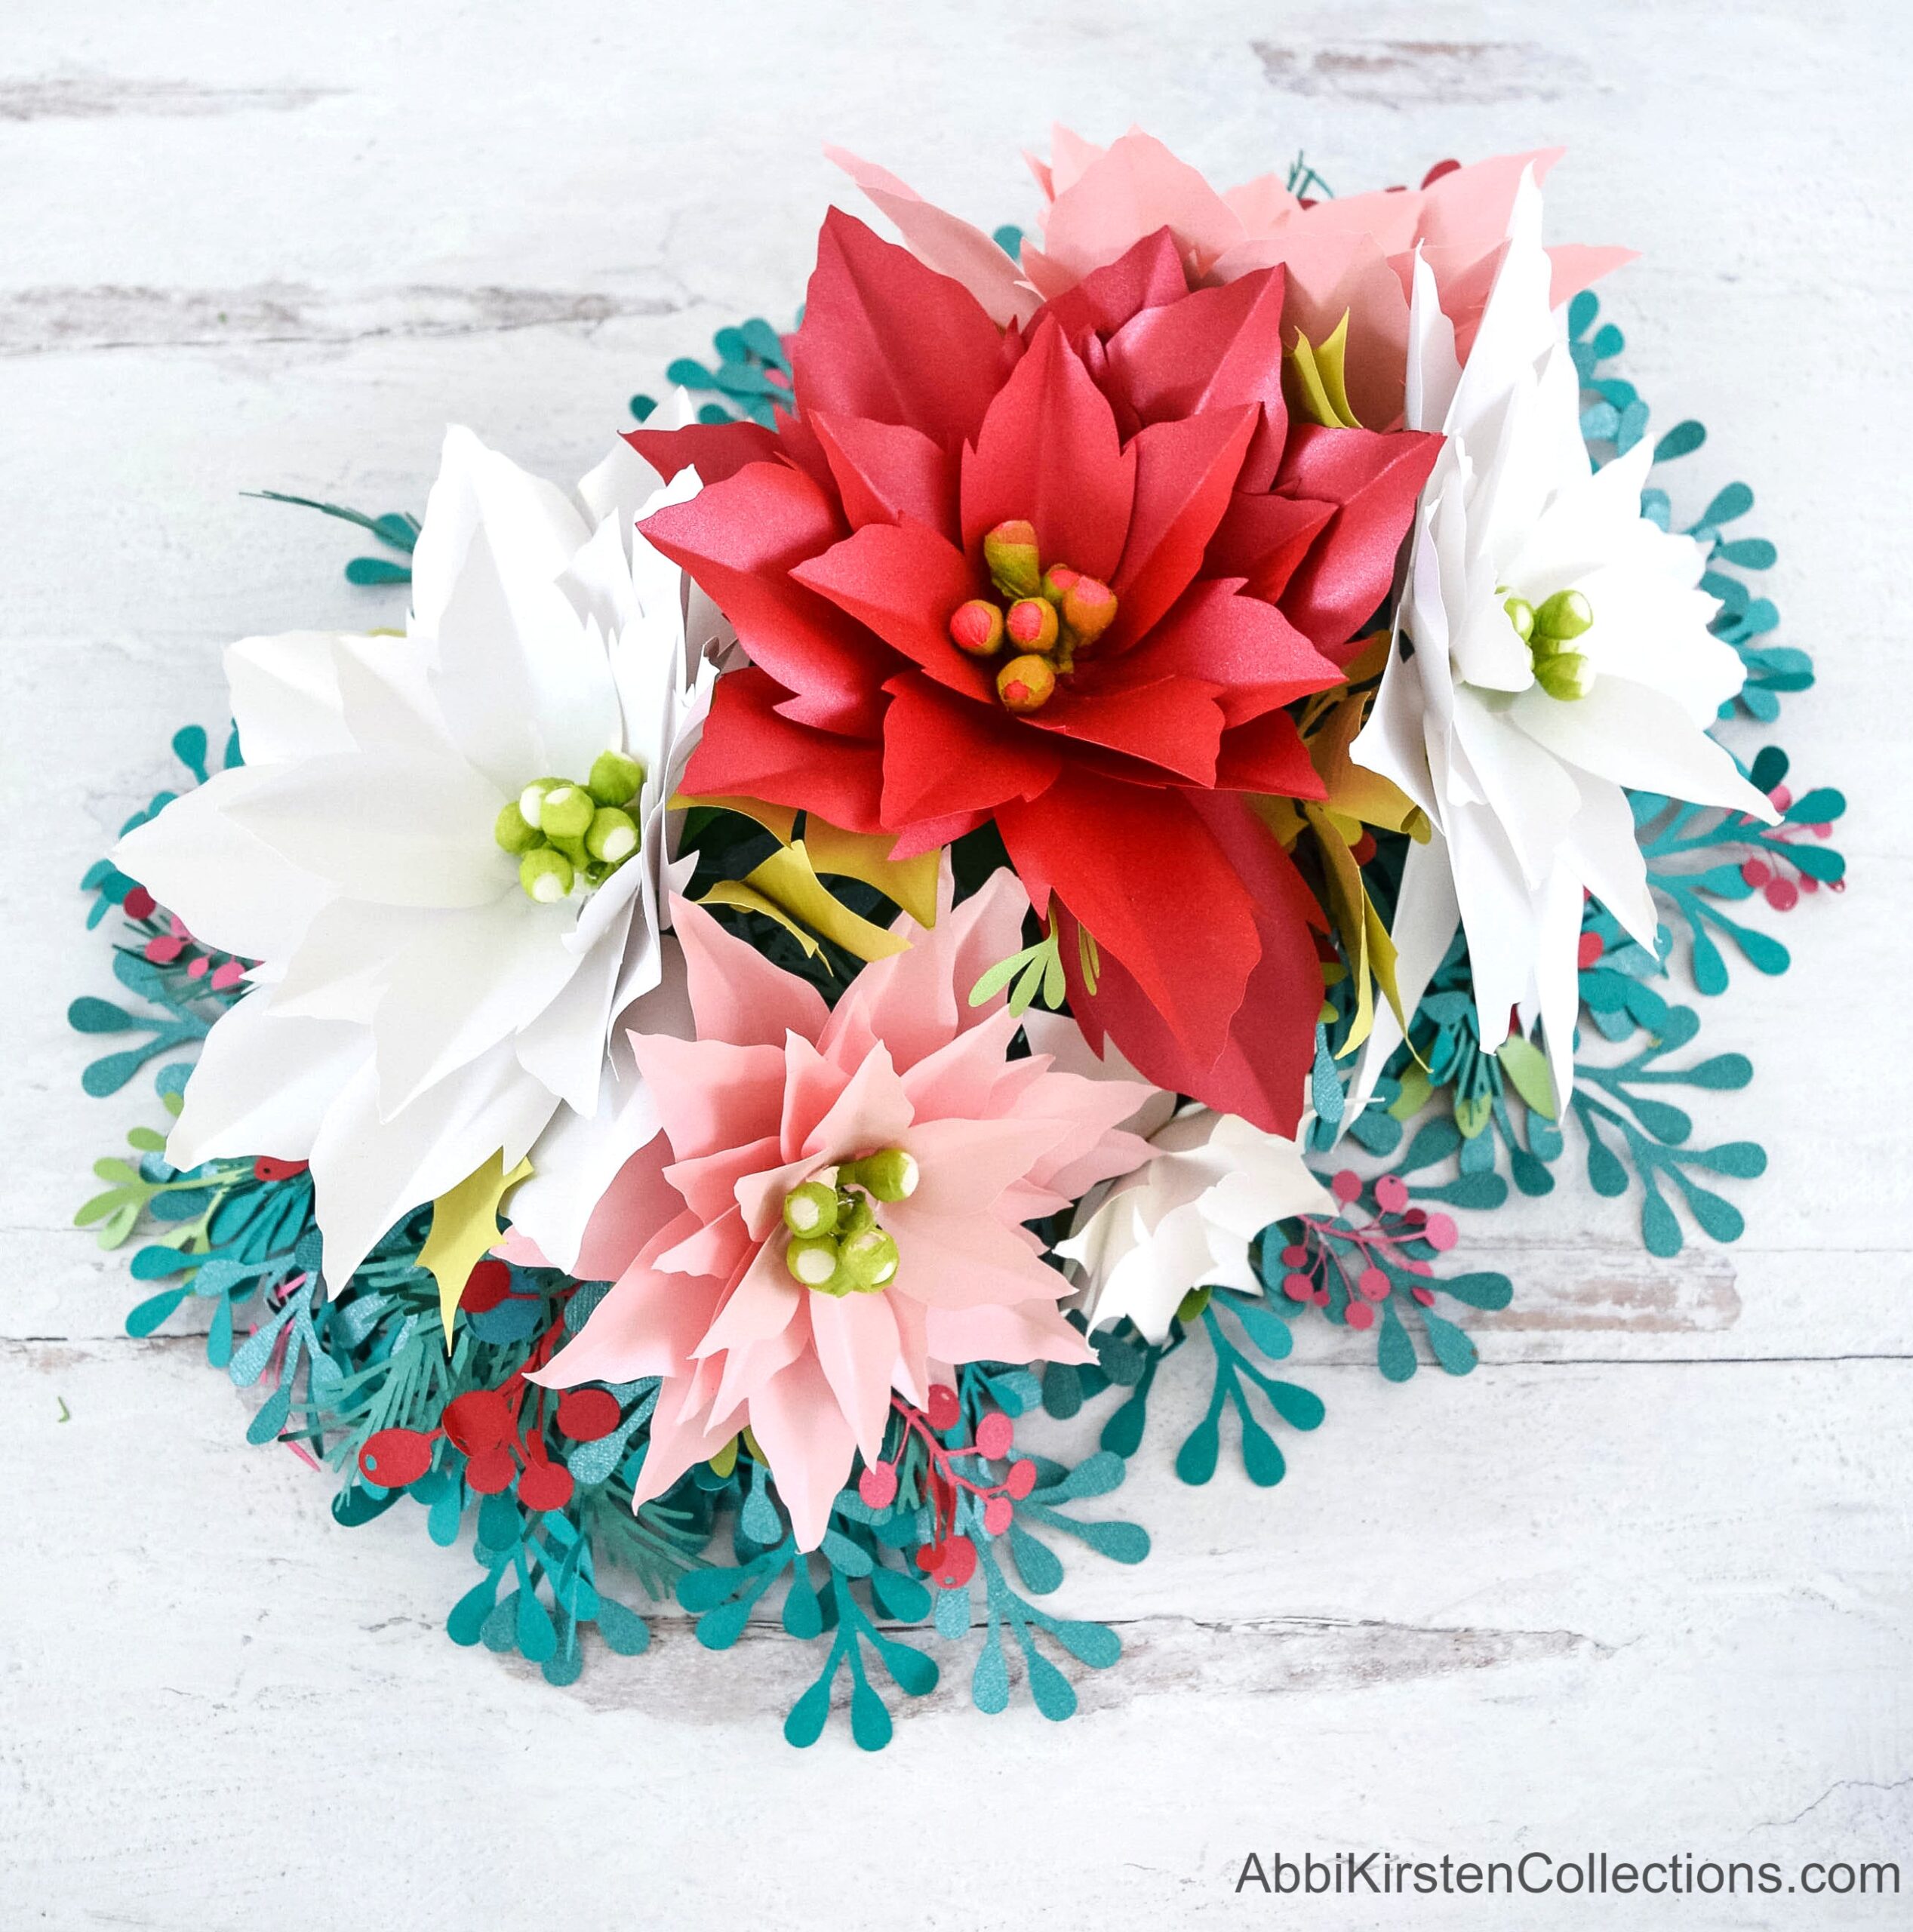 How To Make Paper Poinsettia Flowers And Add Them To A Table Arrangement